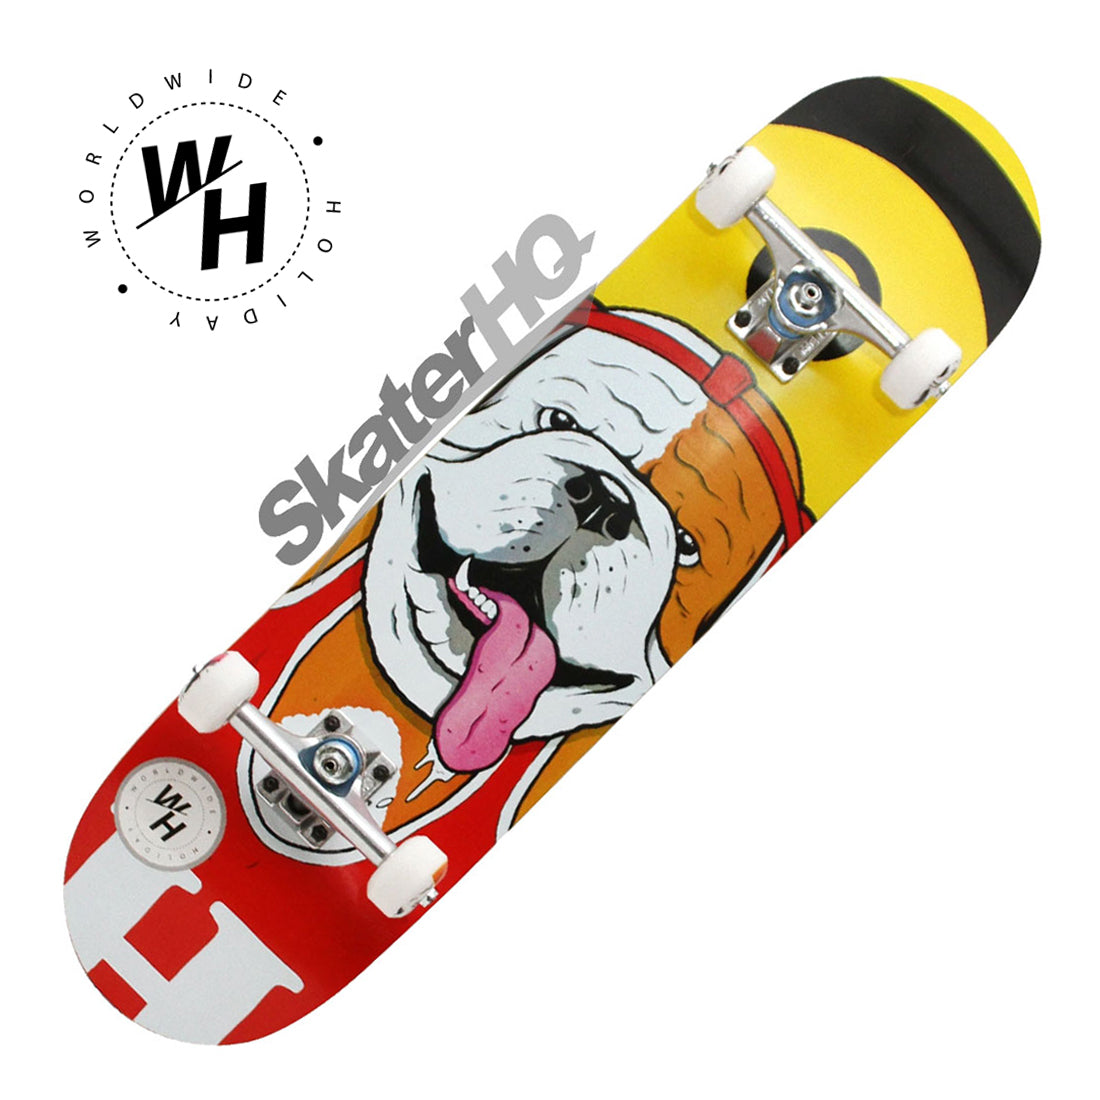 Holiday Sporting Bulldog 7.75 Complete Skateboard Completes Modern Street